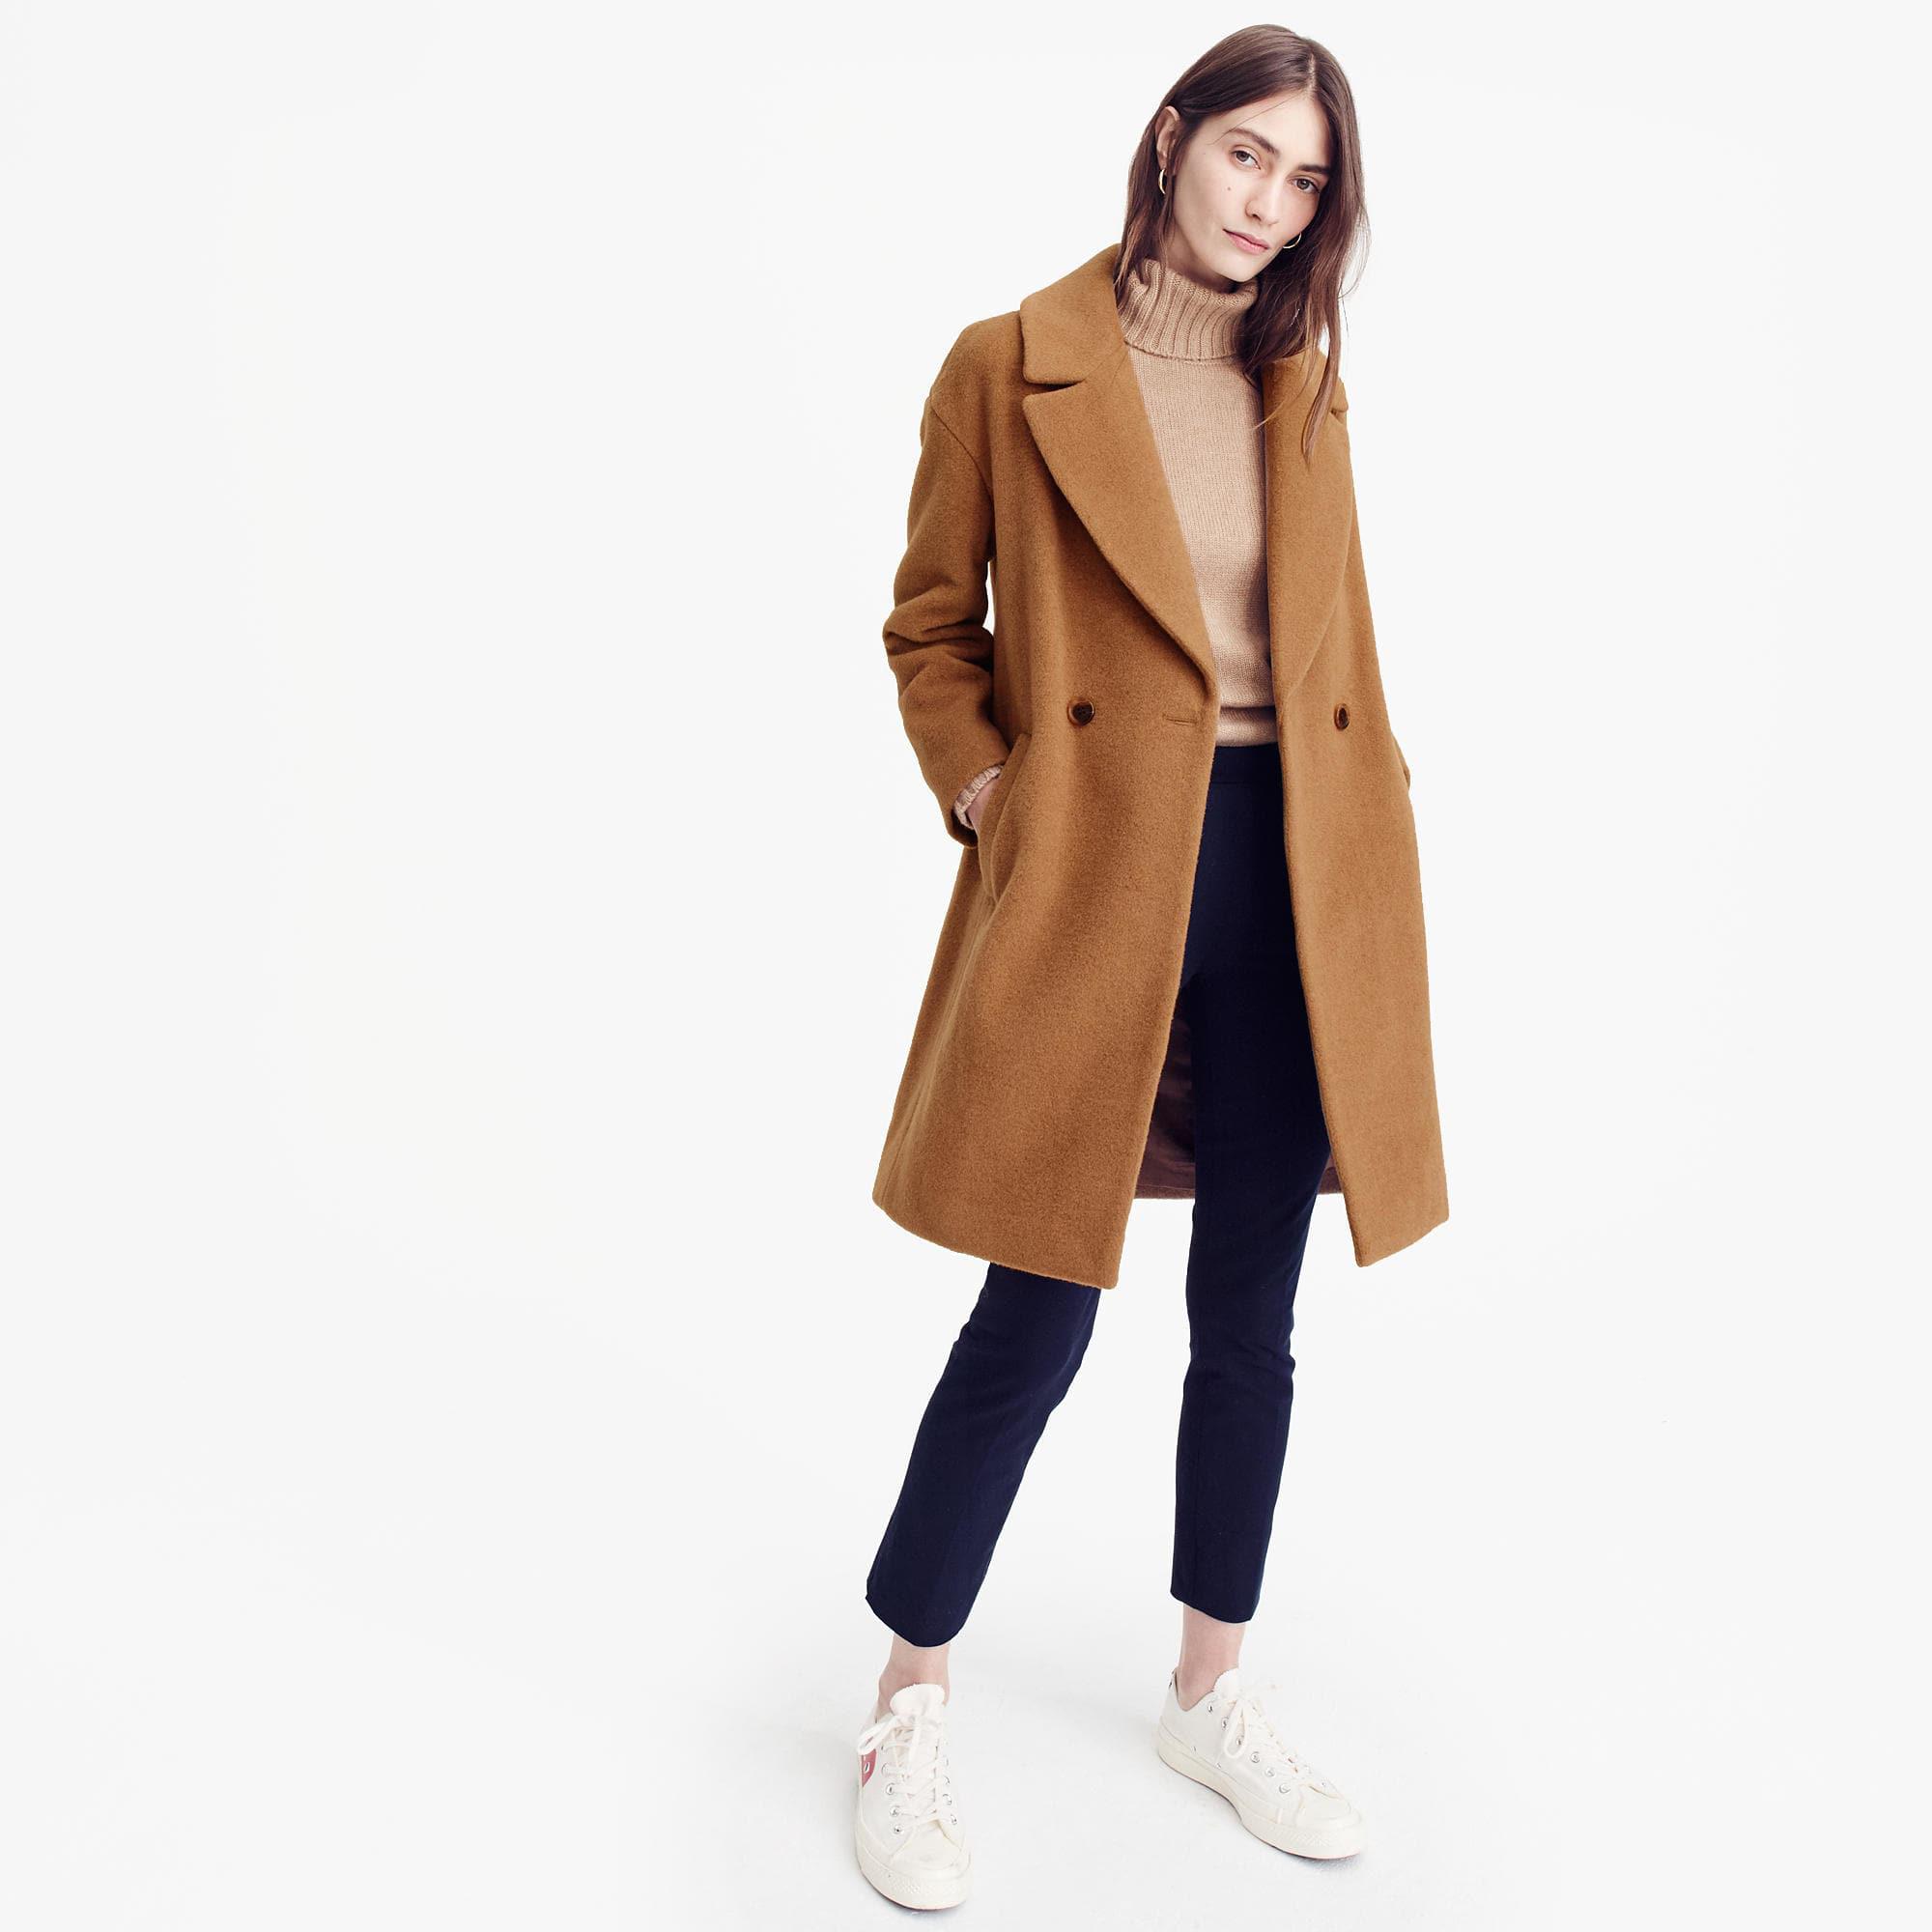 Review: J. Crew Daphne Topcoat in Fashion Look Featuring J.Crew Women'...